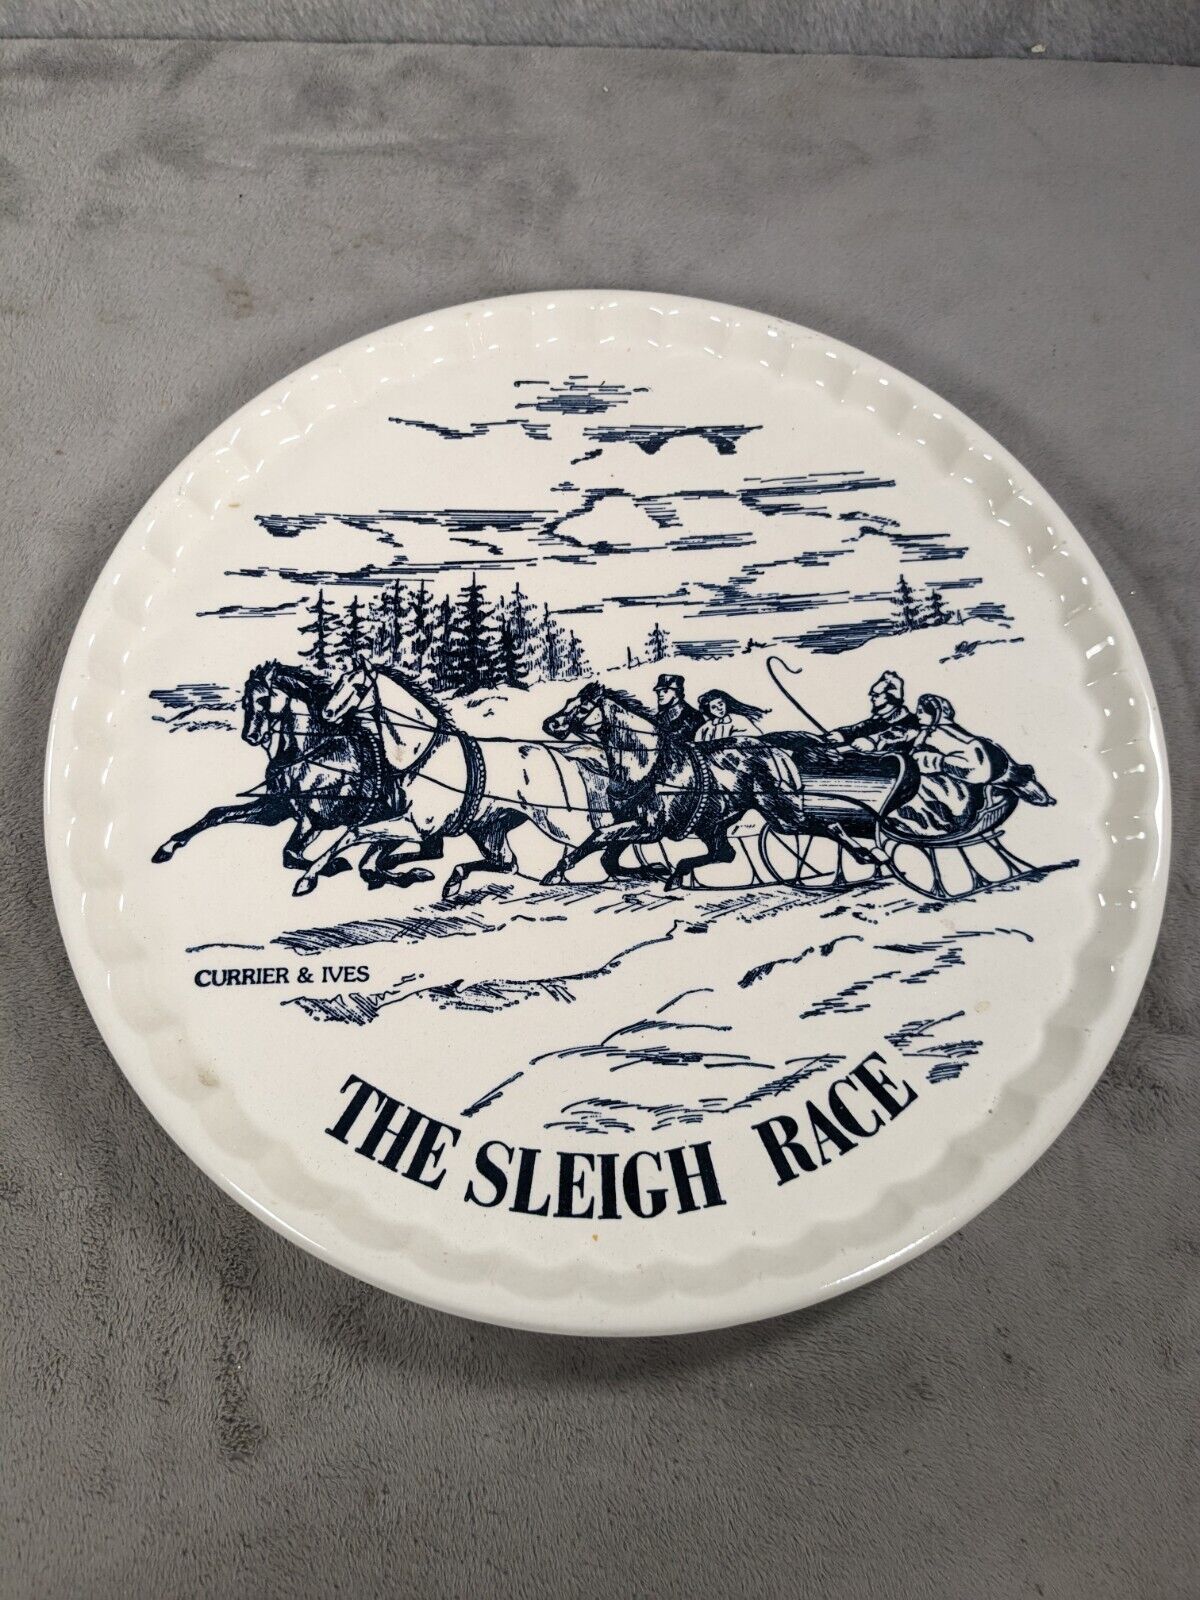 Currier And Ives The Sleigh Race Porcelain Cake Plate Serving Platter Tray